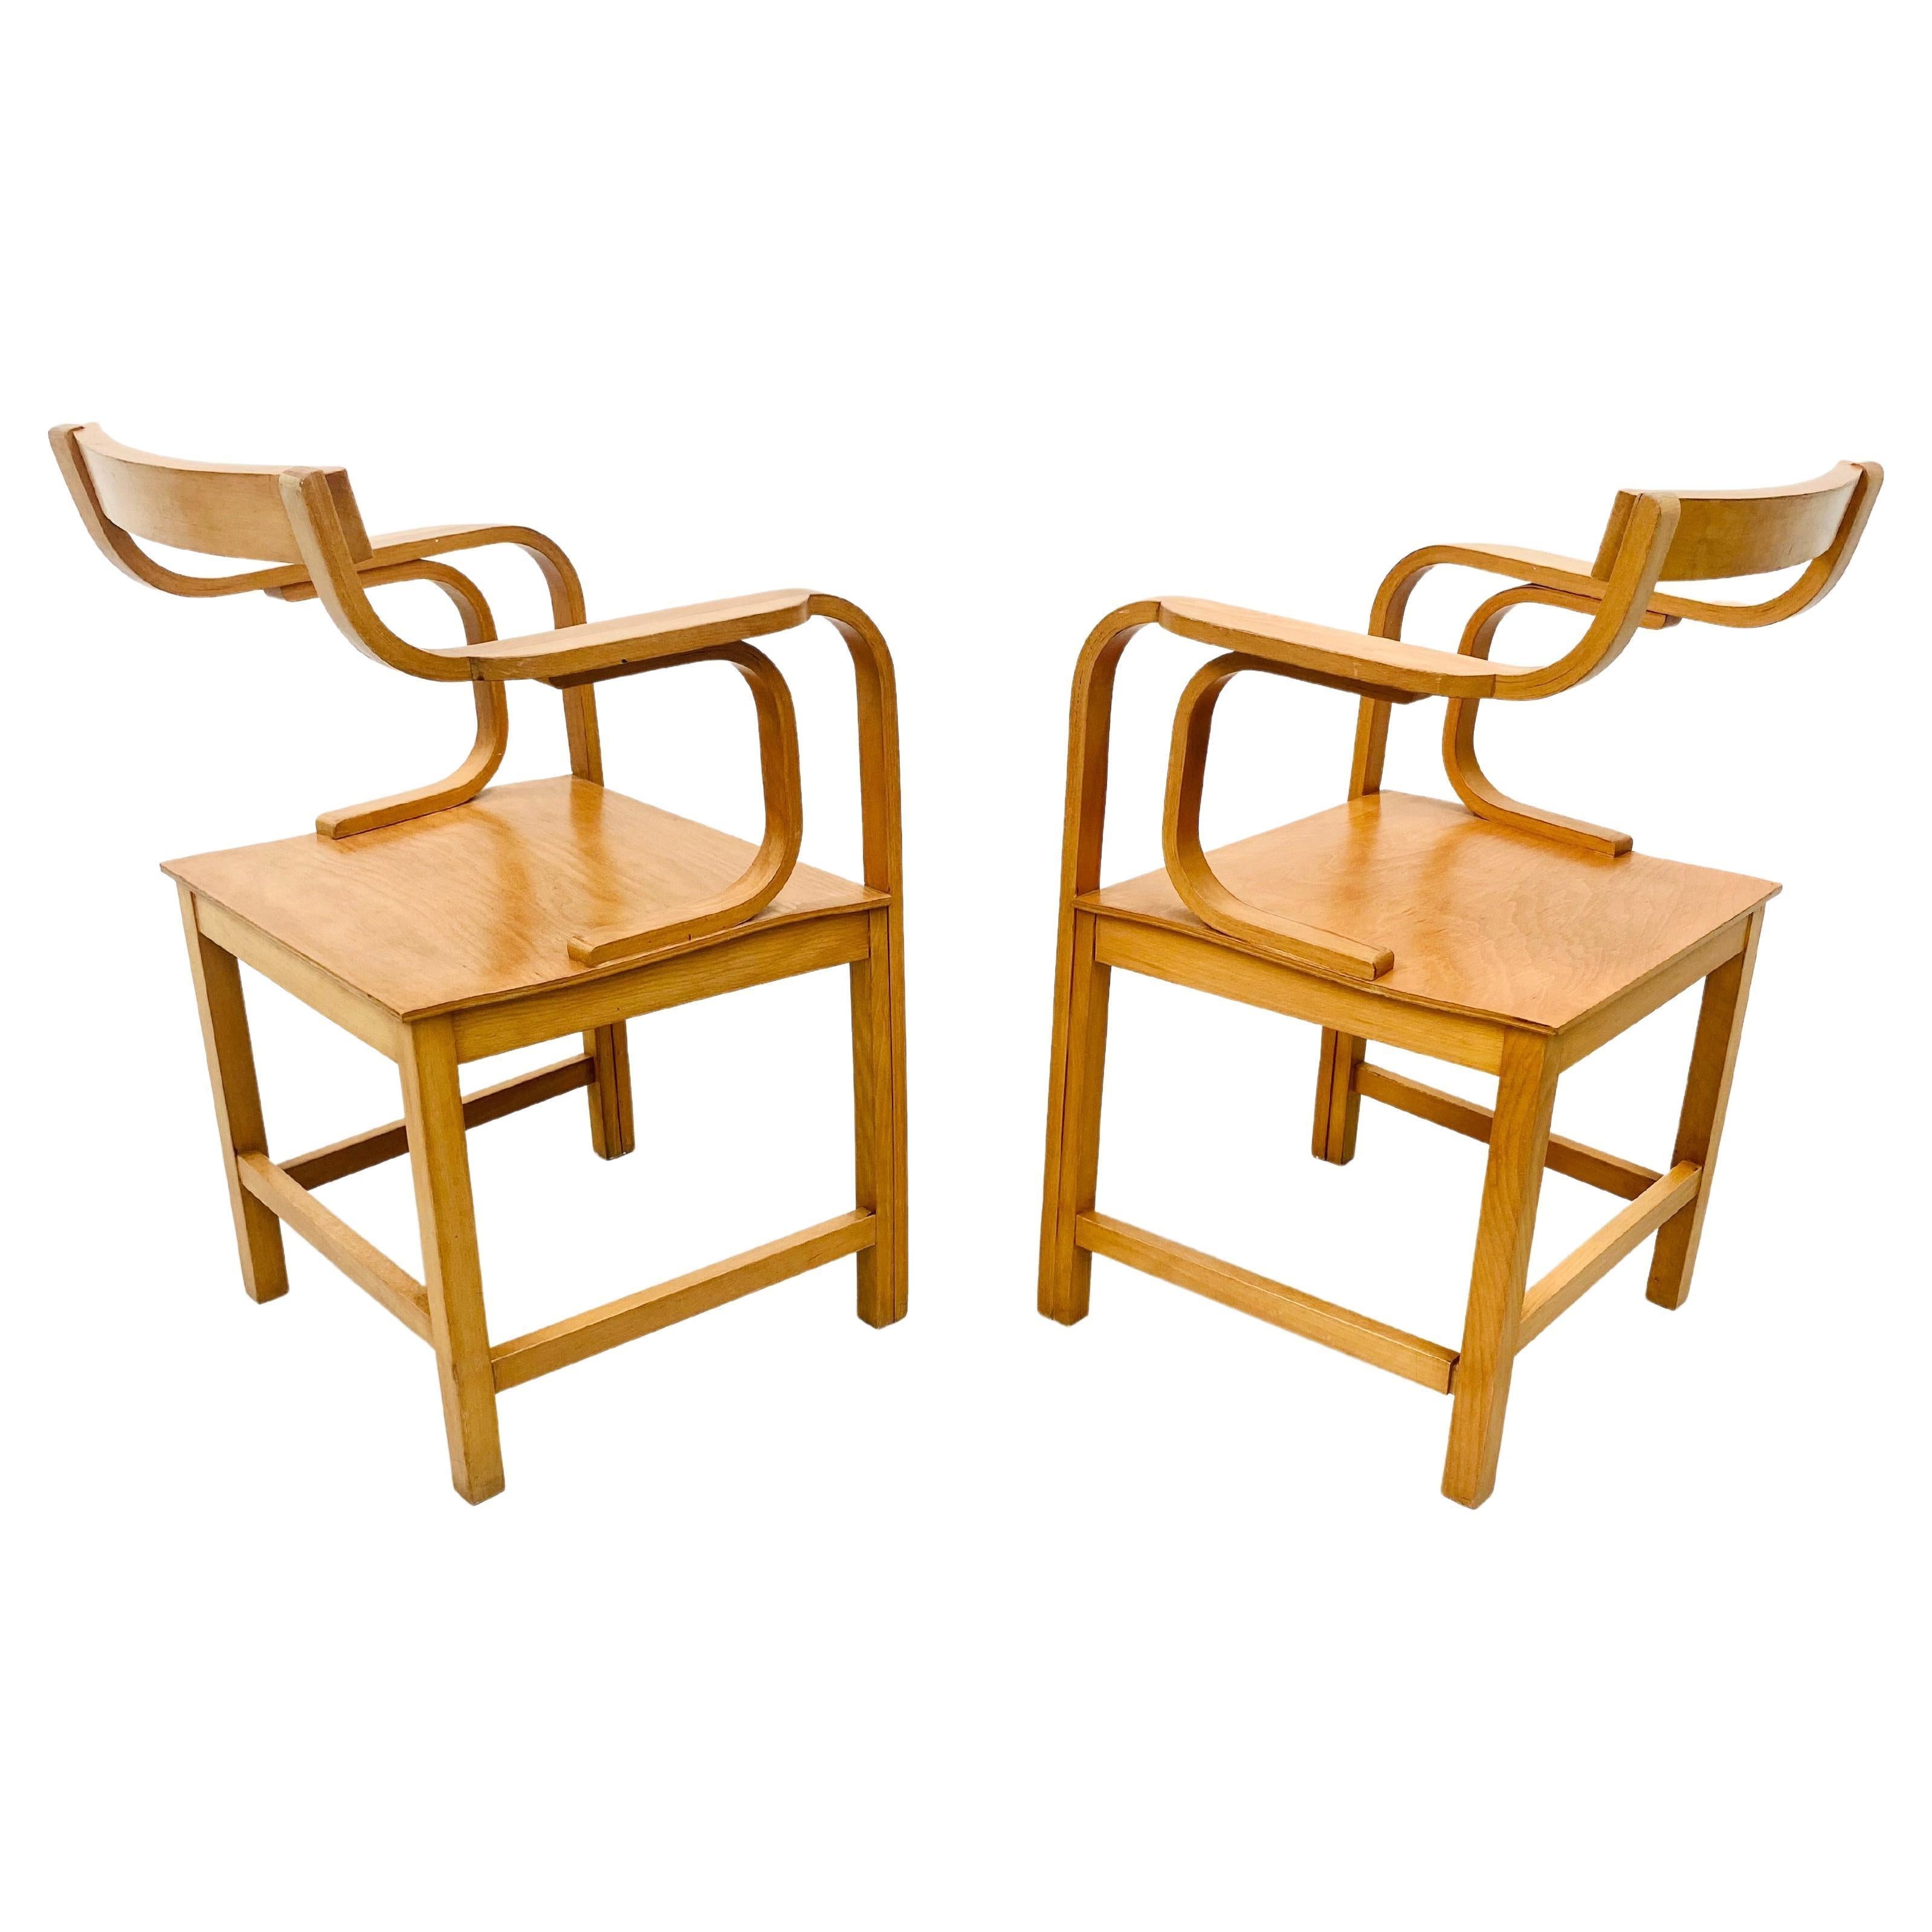 Vintage Dutch Plywood Beech Armchairs by Enraf Nonius Delft, 1970s For Sale 5